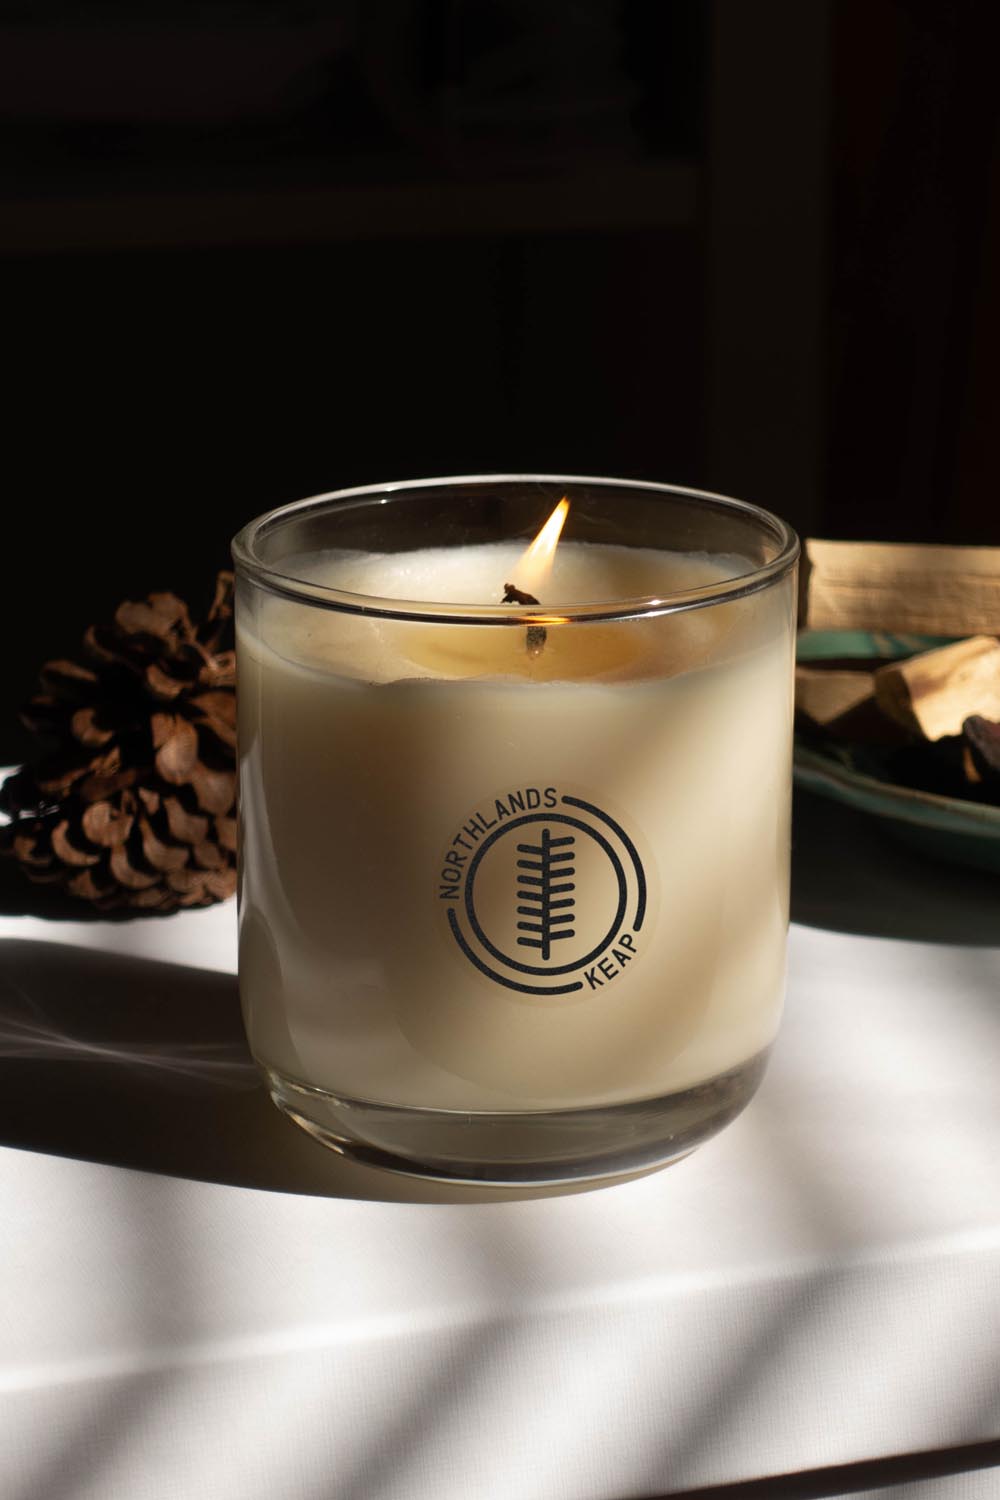 Keap Candles Northlands coconut wax candle | Keap Candles